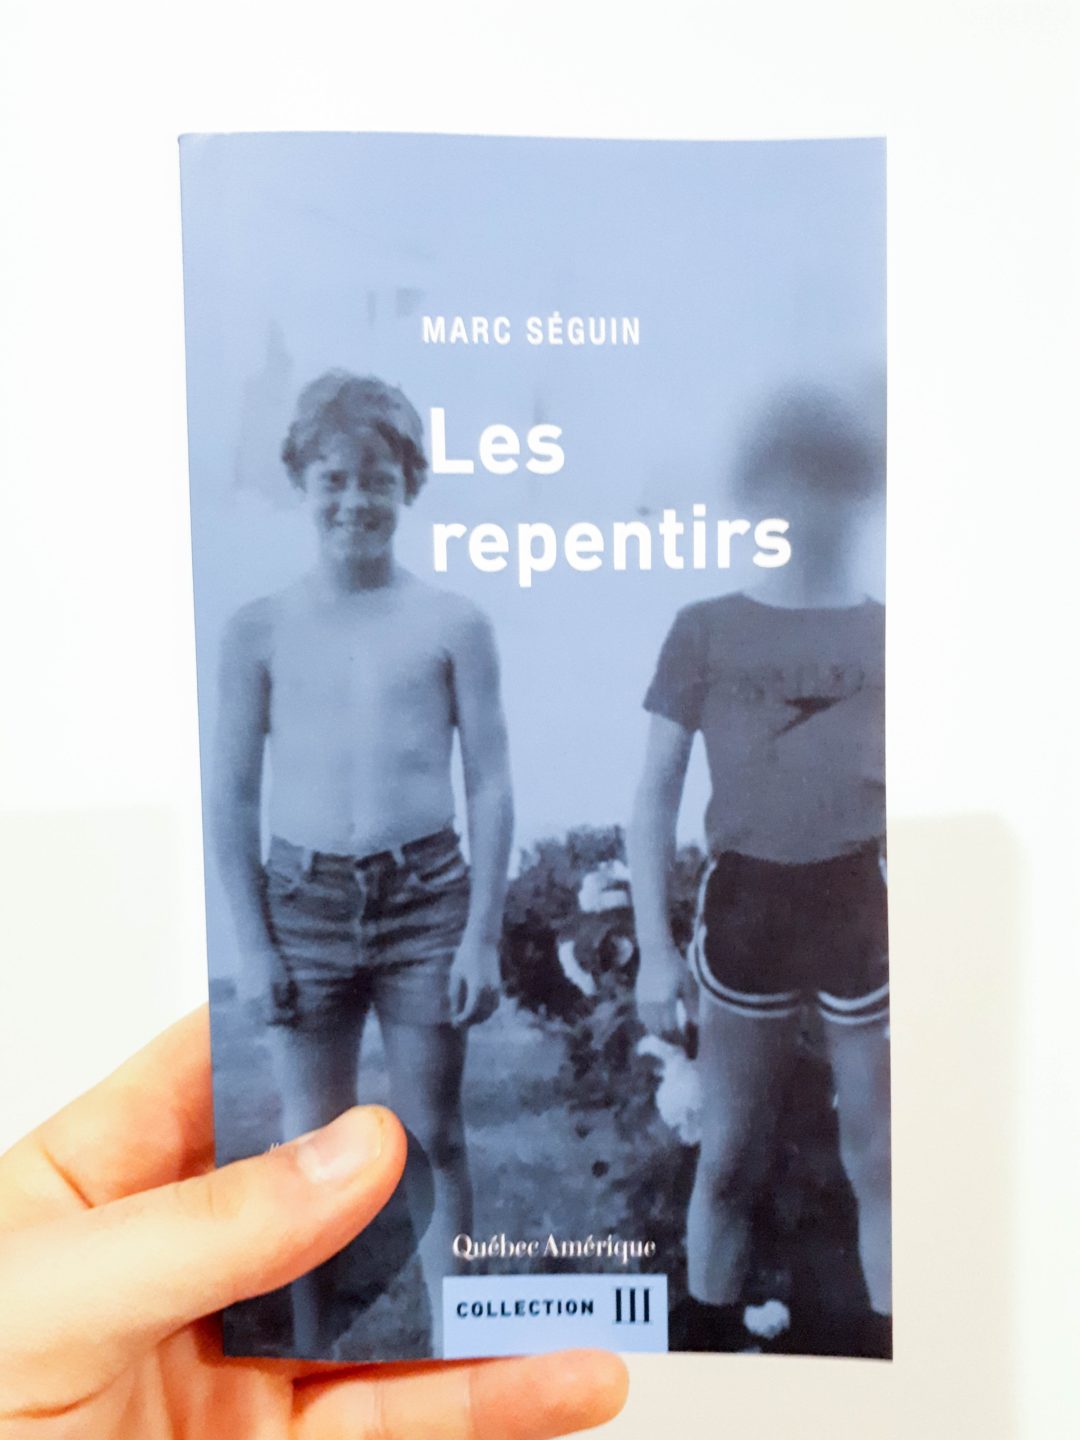 Les repentirs